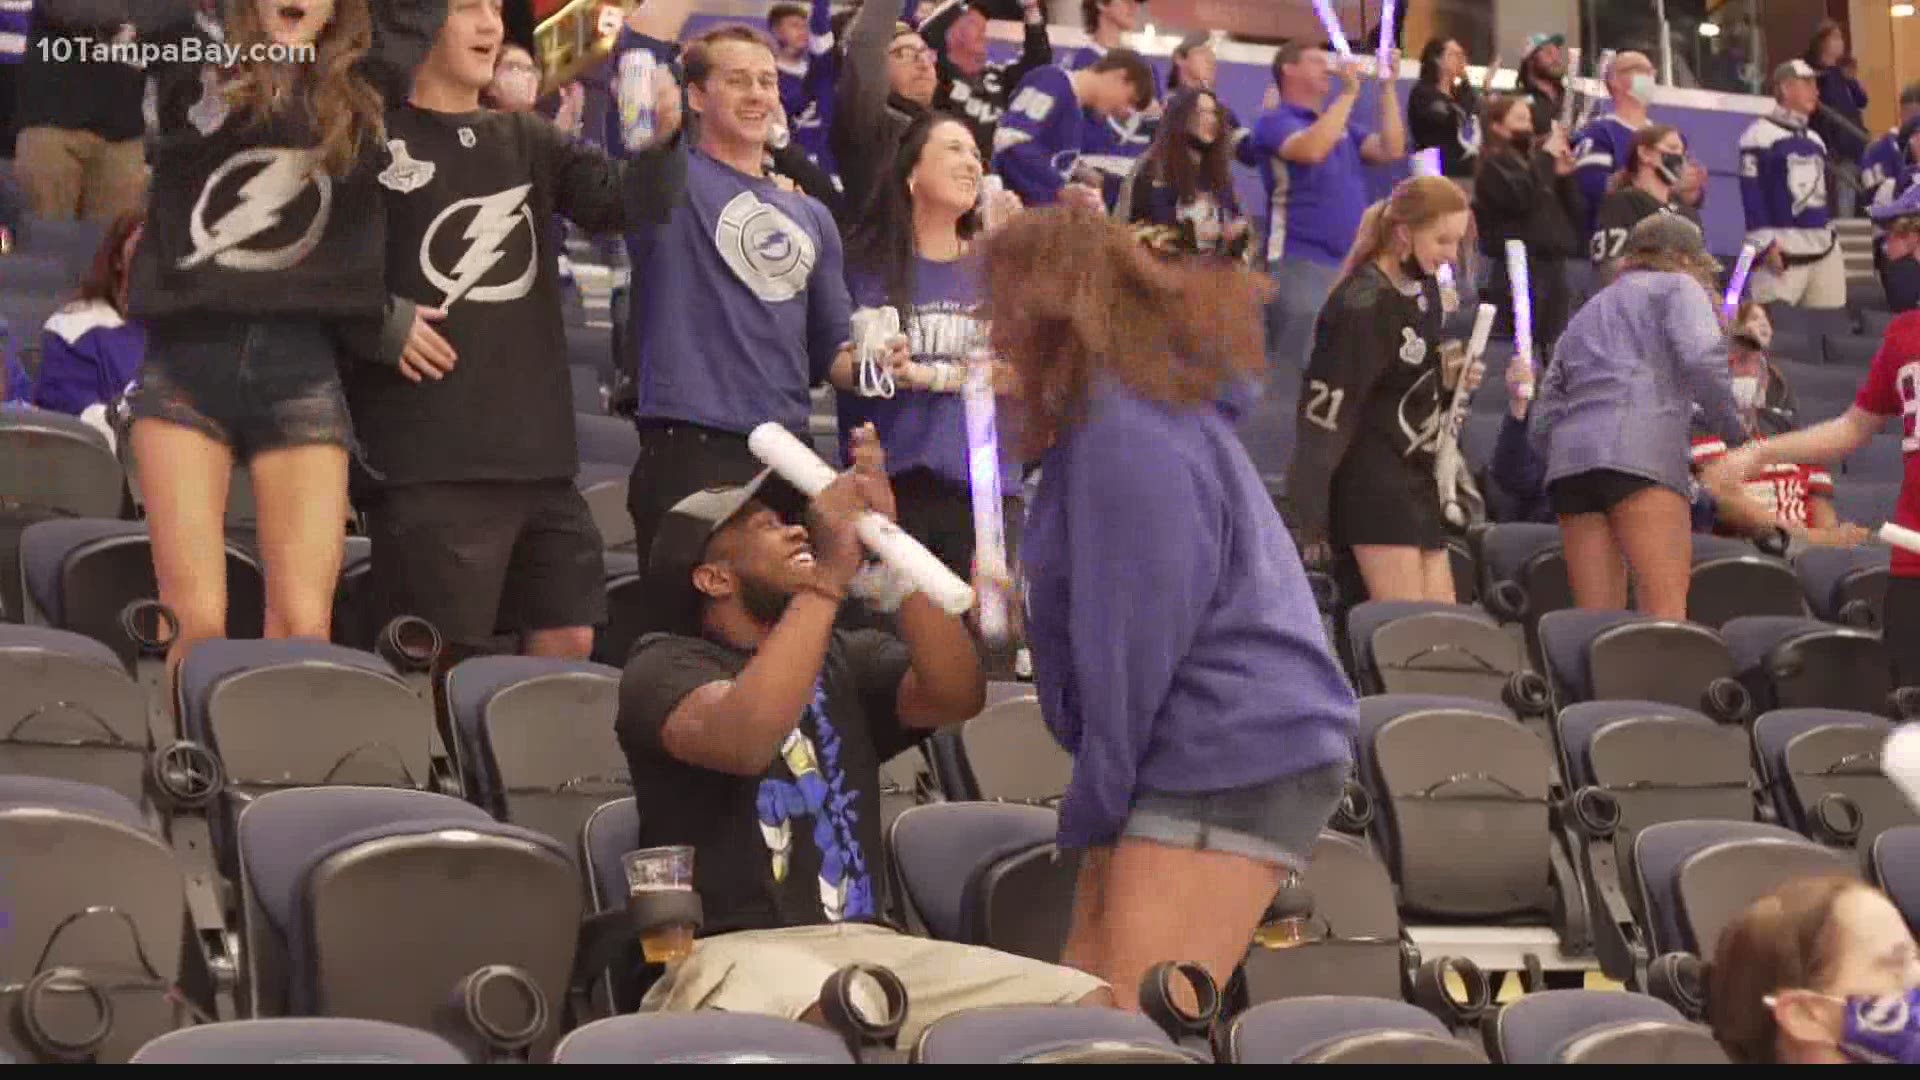 Hockey Fan Gets An Epic Beatdown From A Man And Woman At A Tampa Bay  Lightning Game